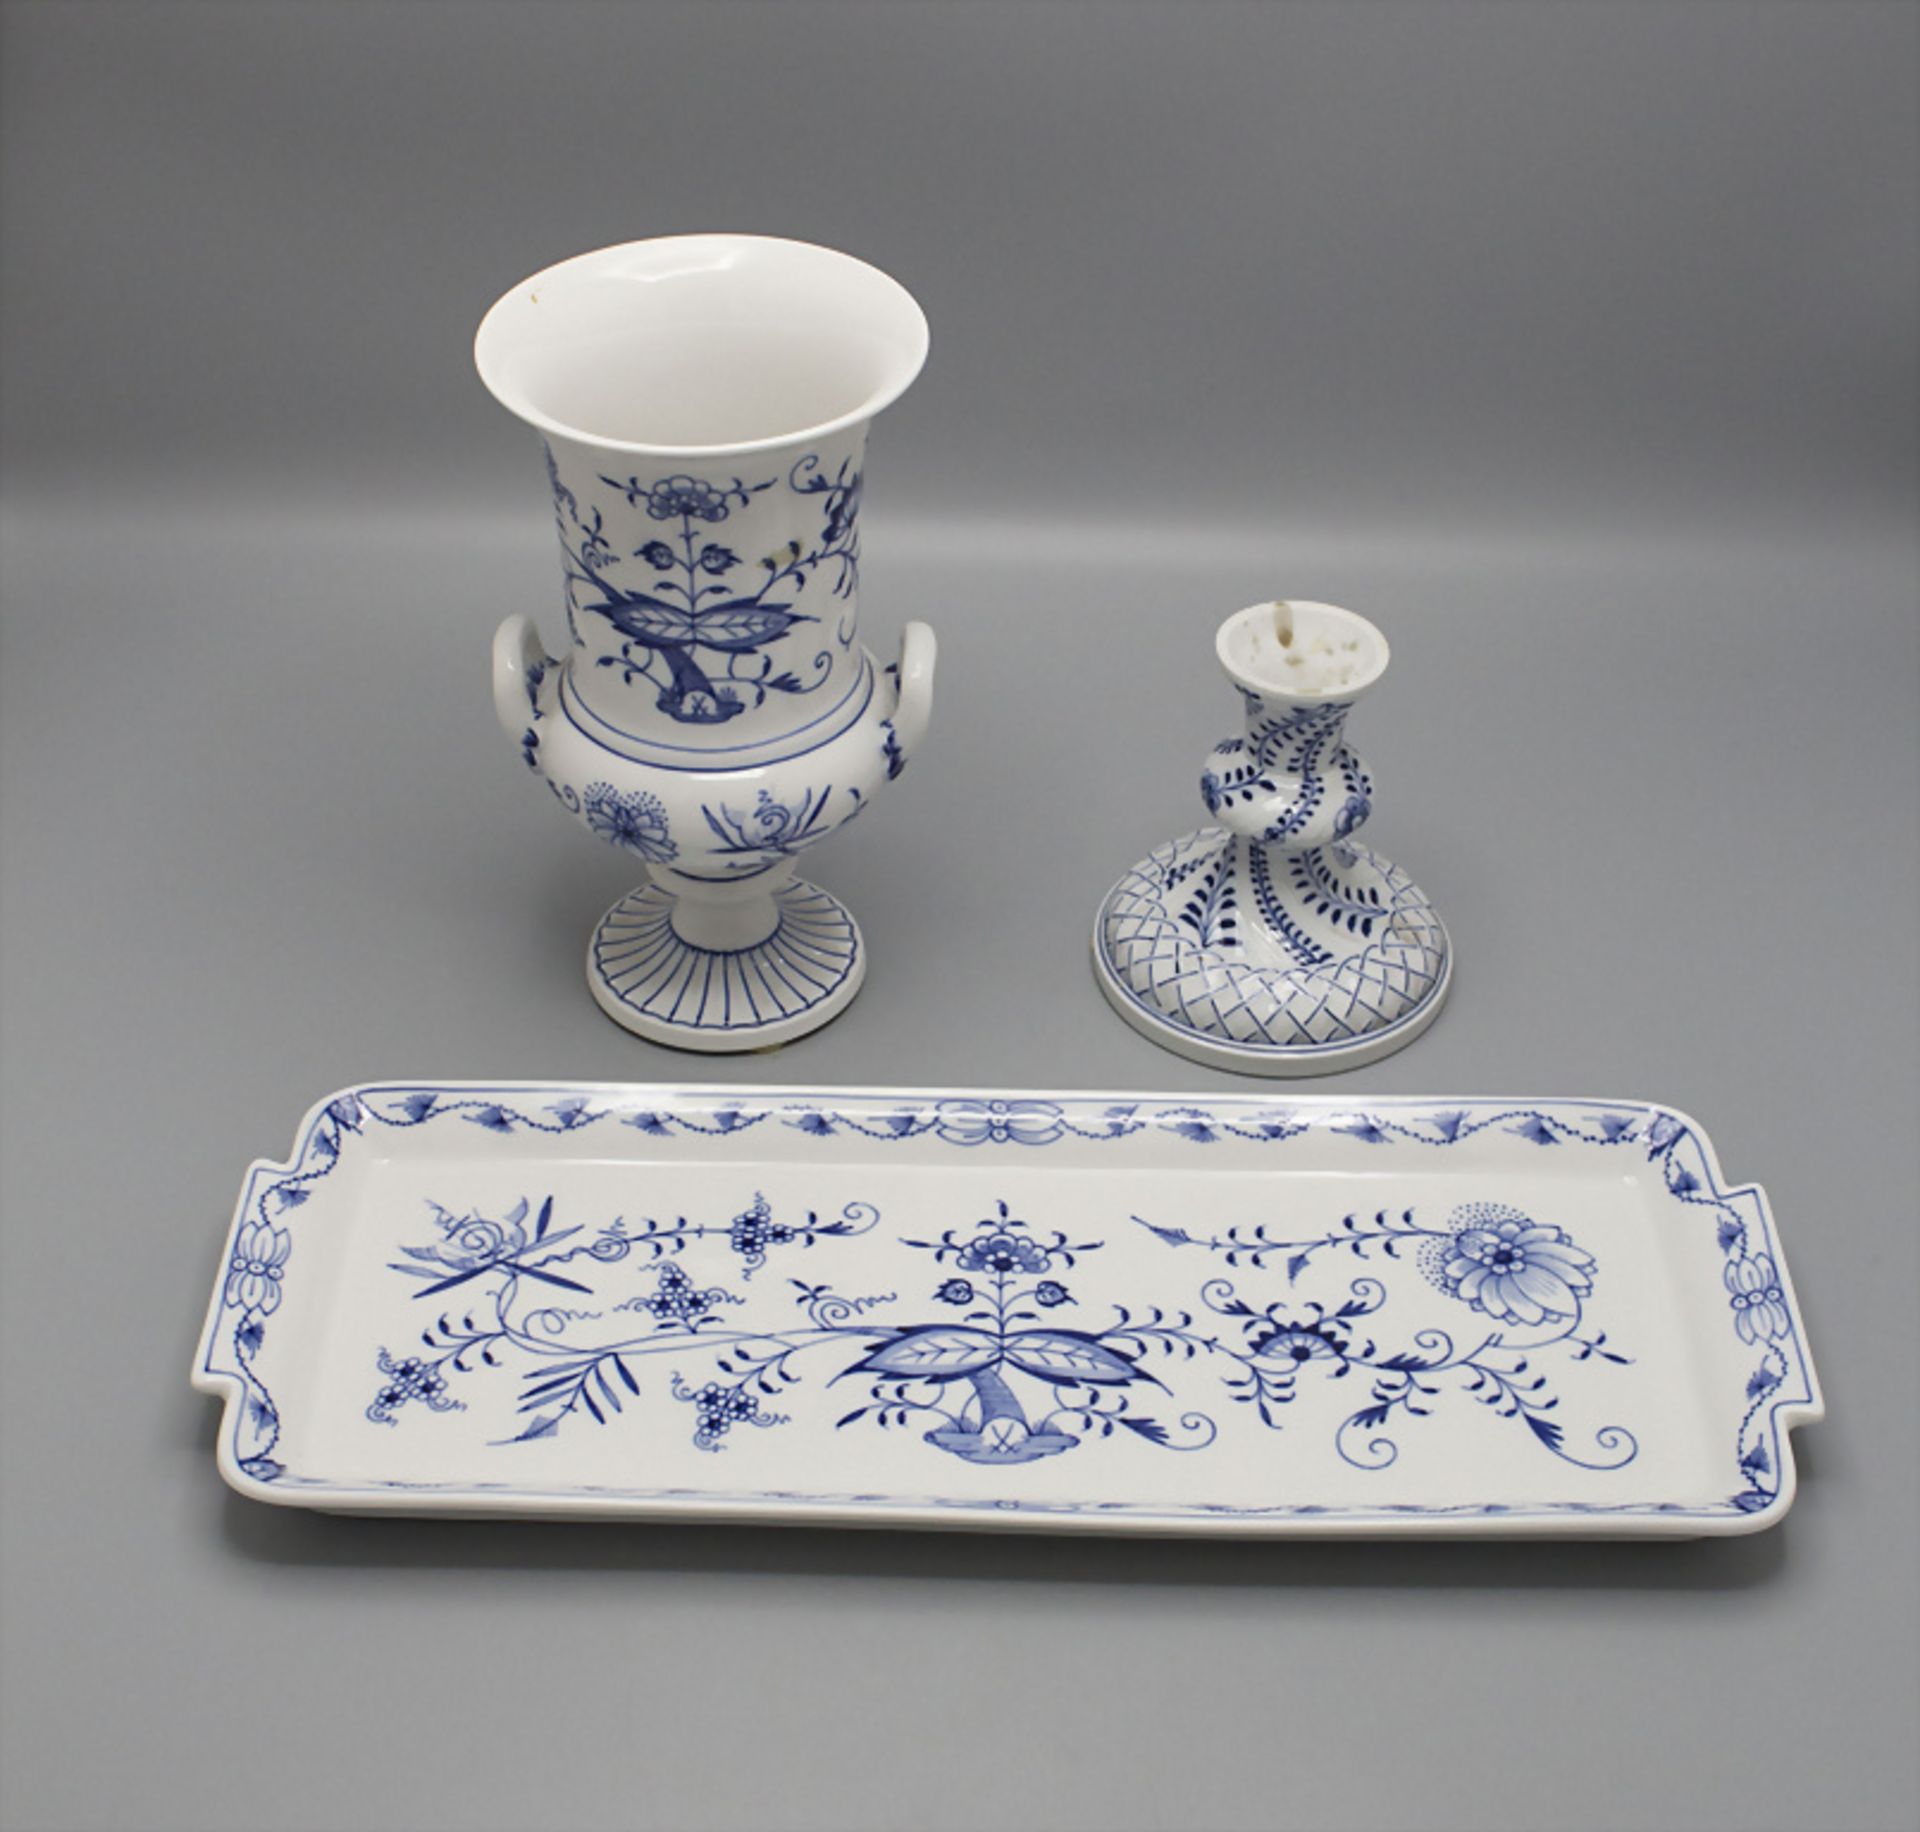 3 Teile Zwiebelmuster / 3 pieces of porcelain with onion pattern, Meissen, 20. Jh.